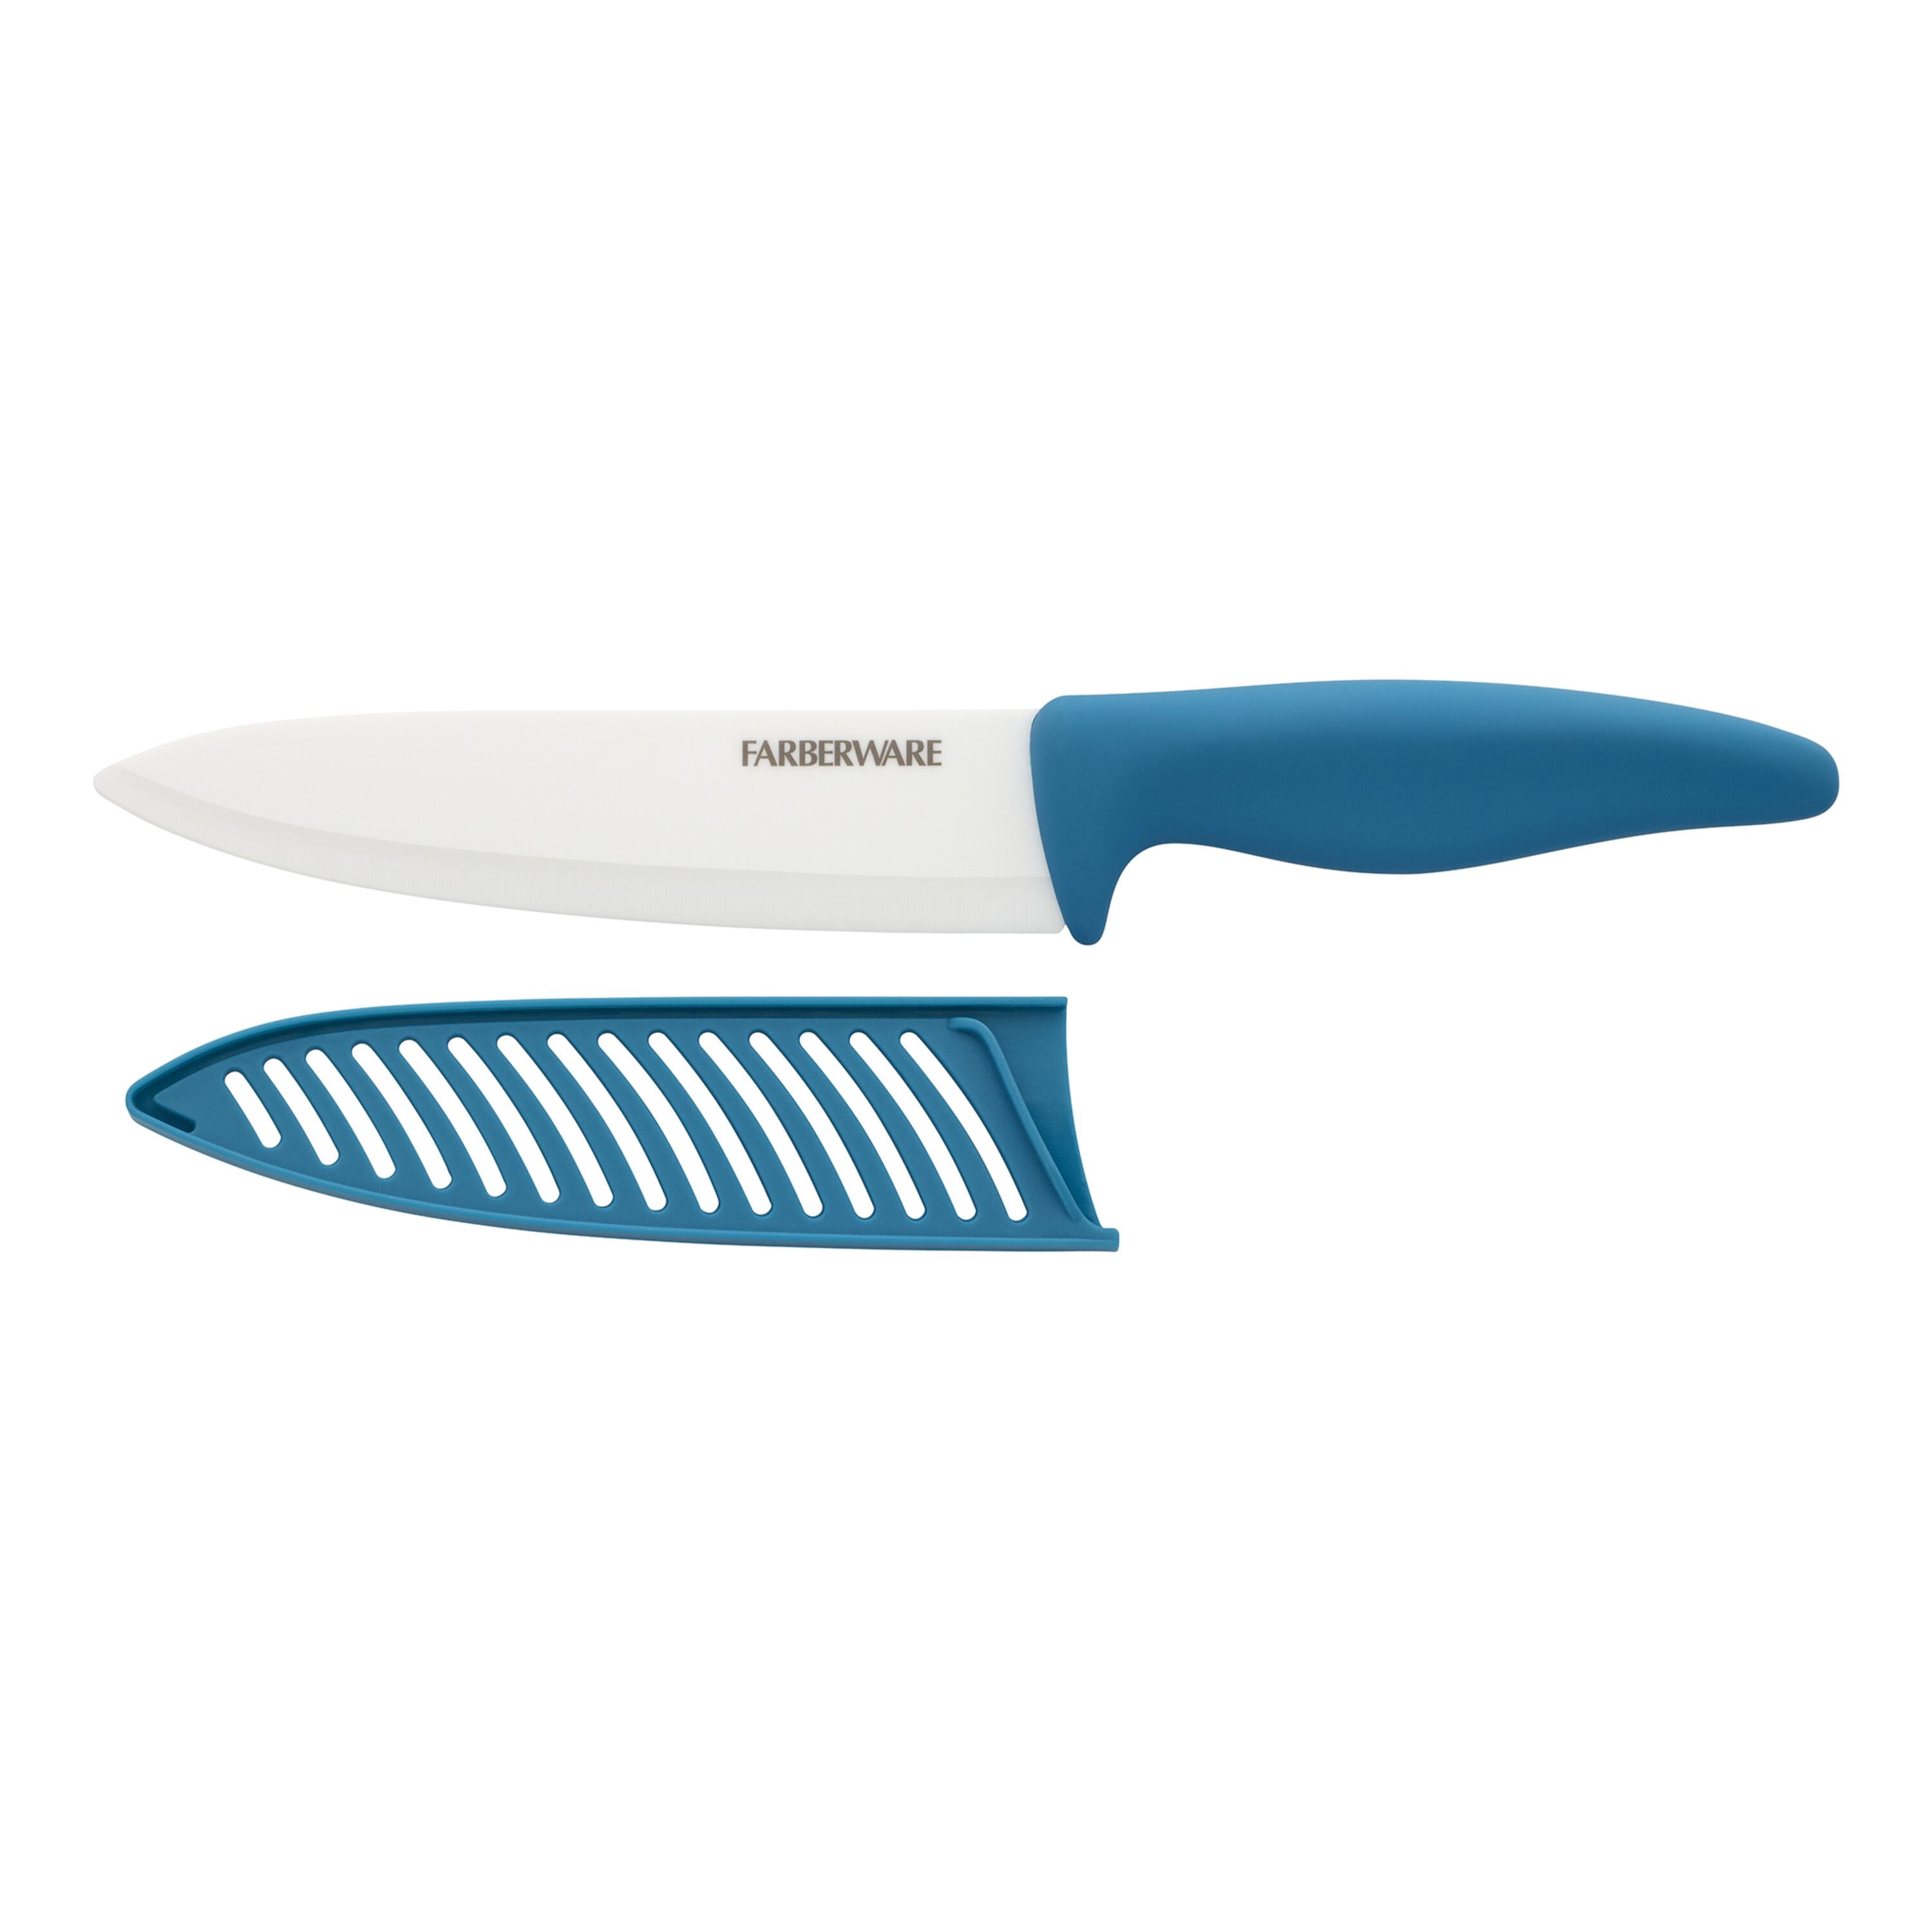 Oster Baldwin 7.6 Inch Stainless Steel Chef Knife